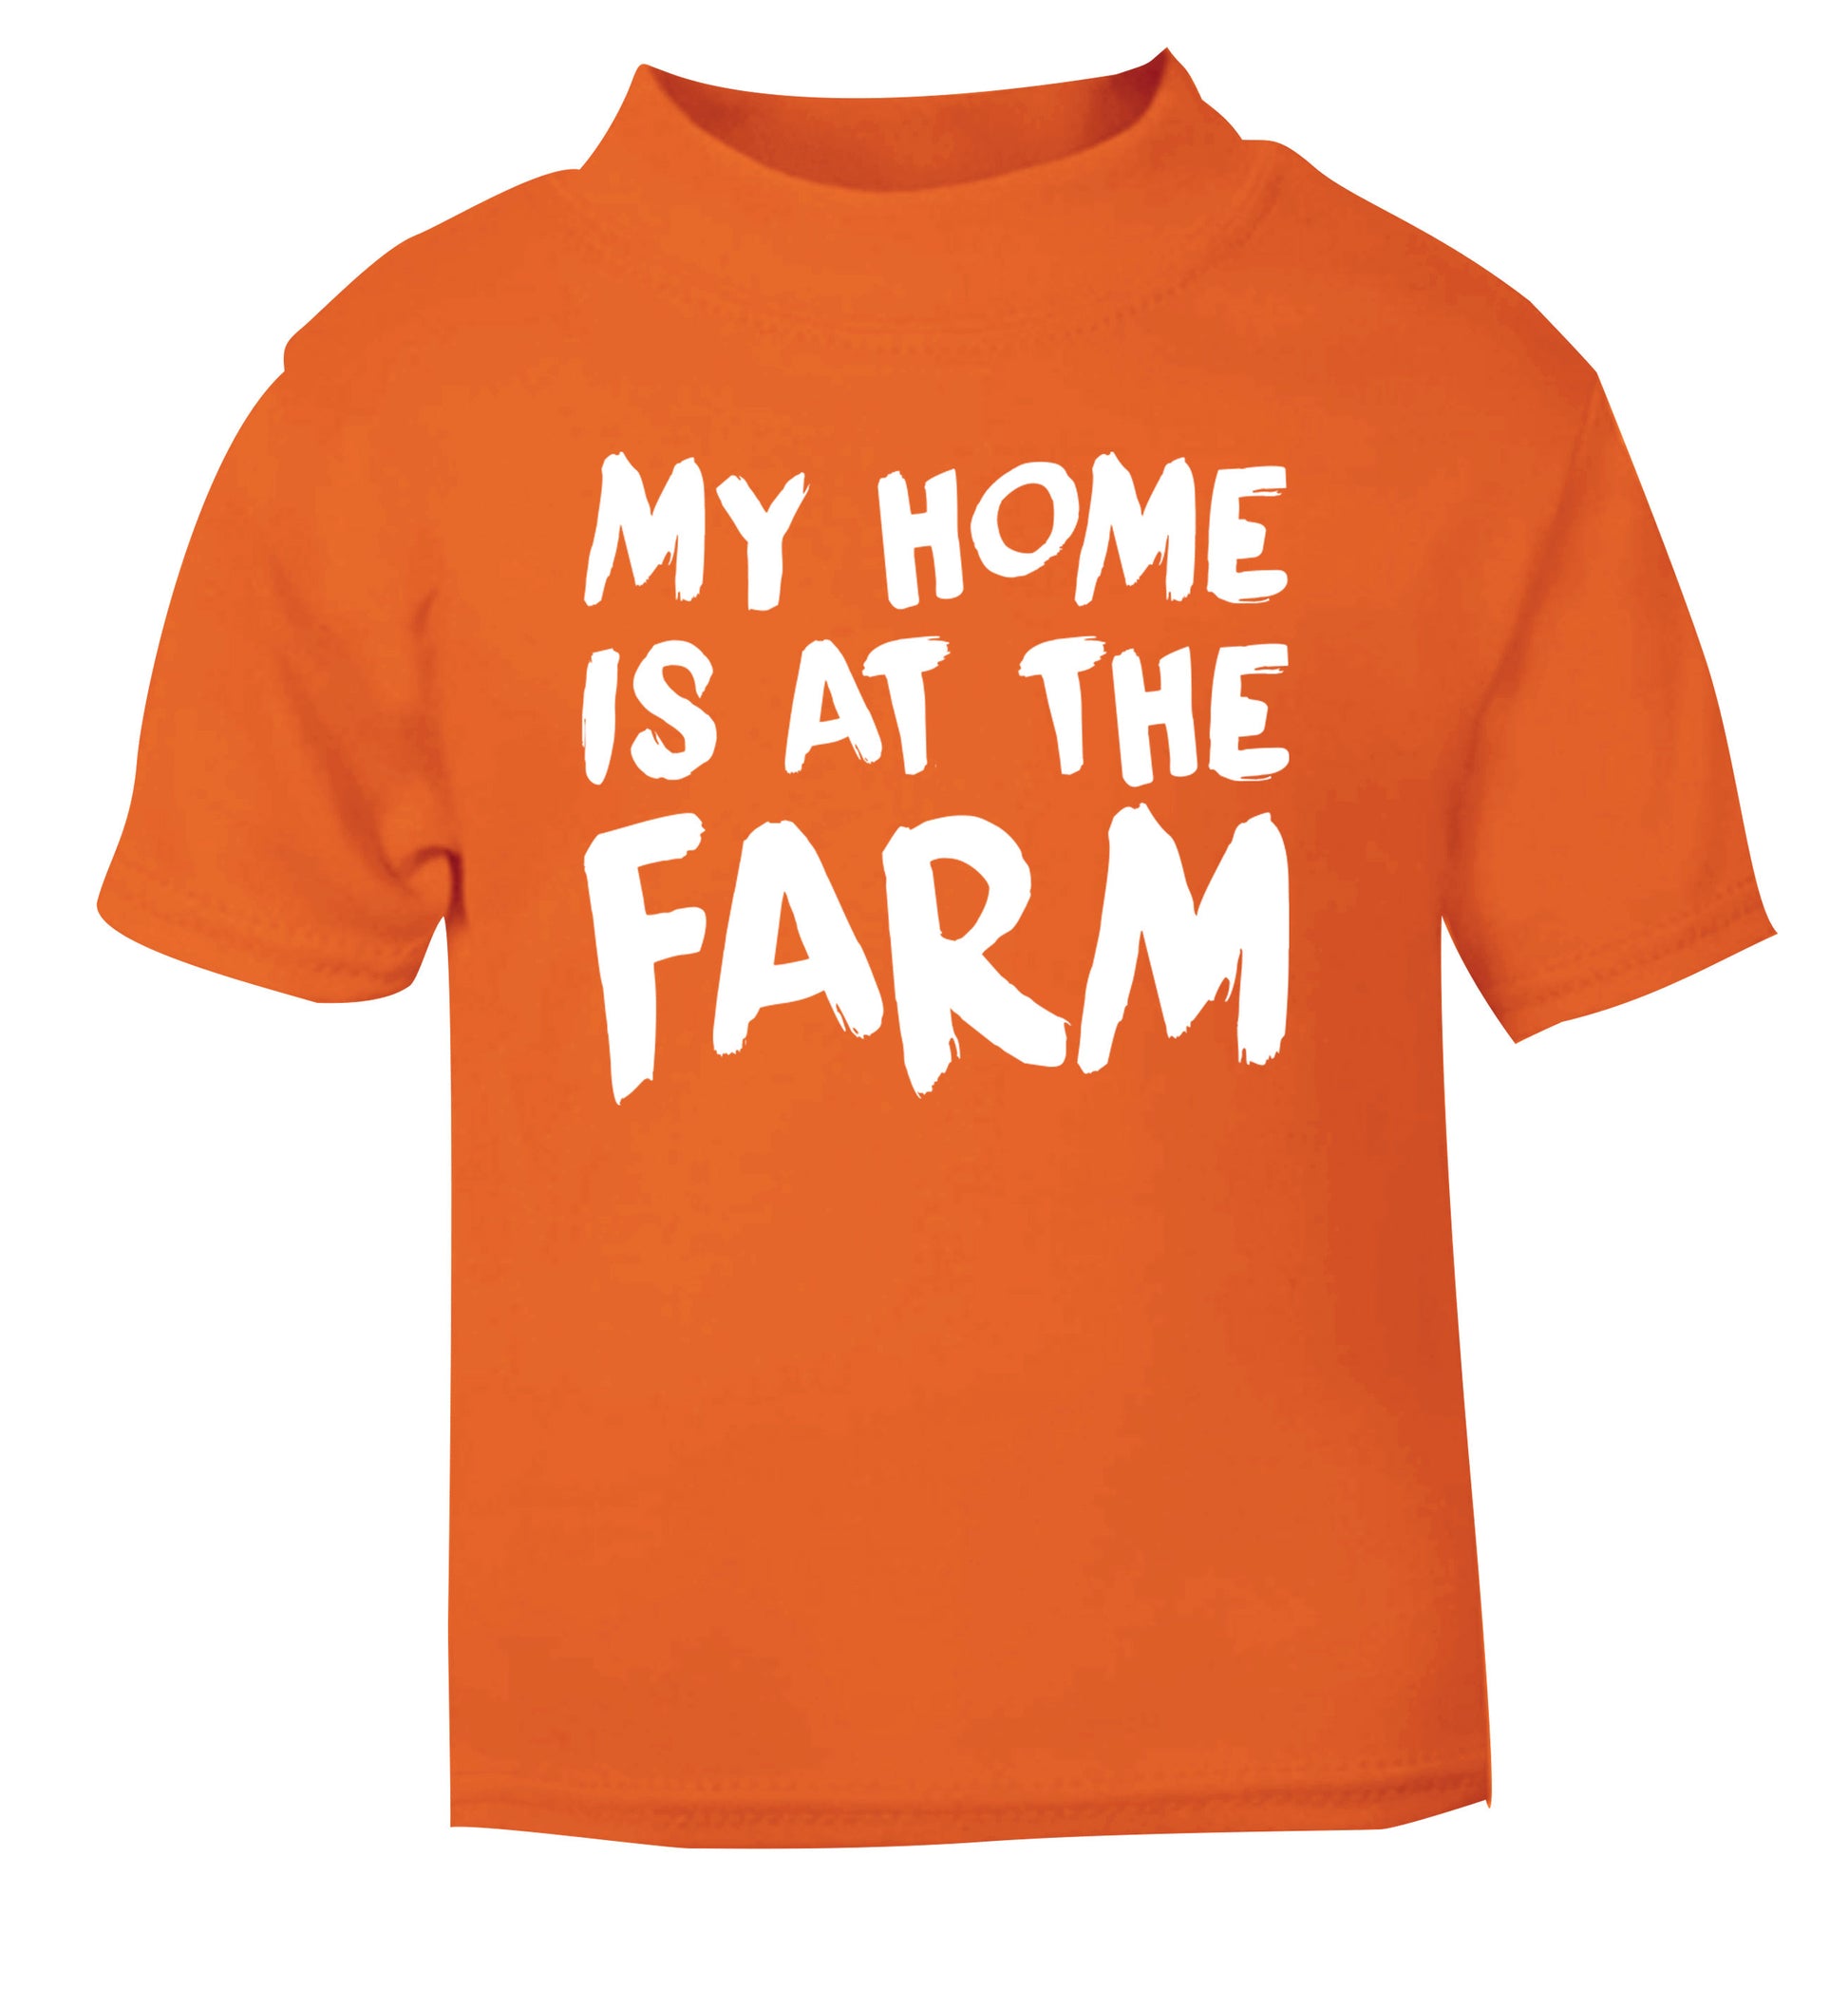 My home is at the farm orange Baby Toddler Tshirt 2 Years